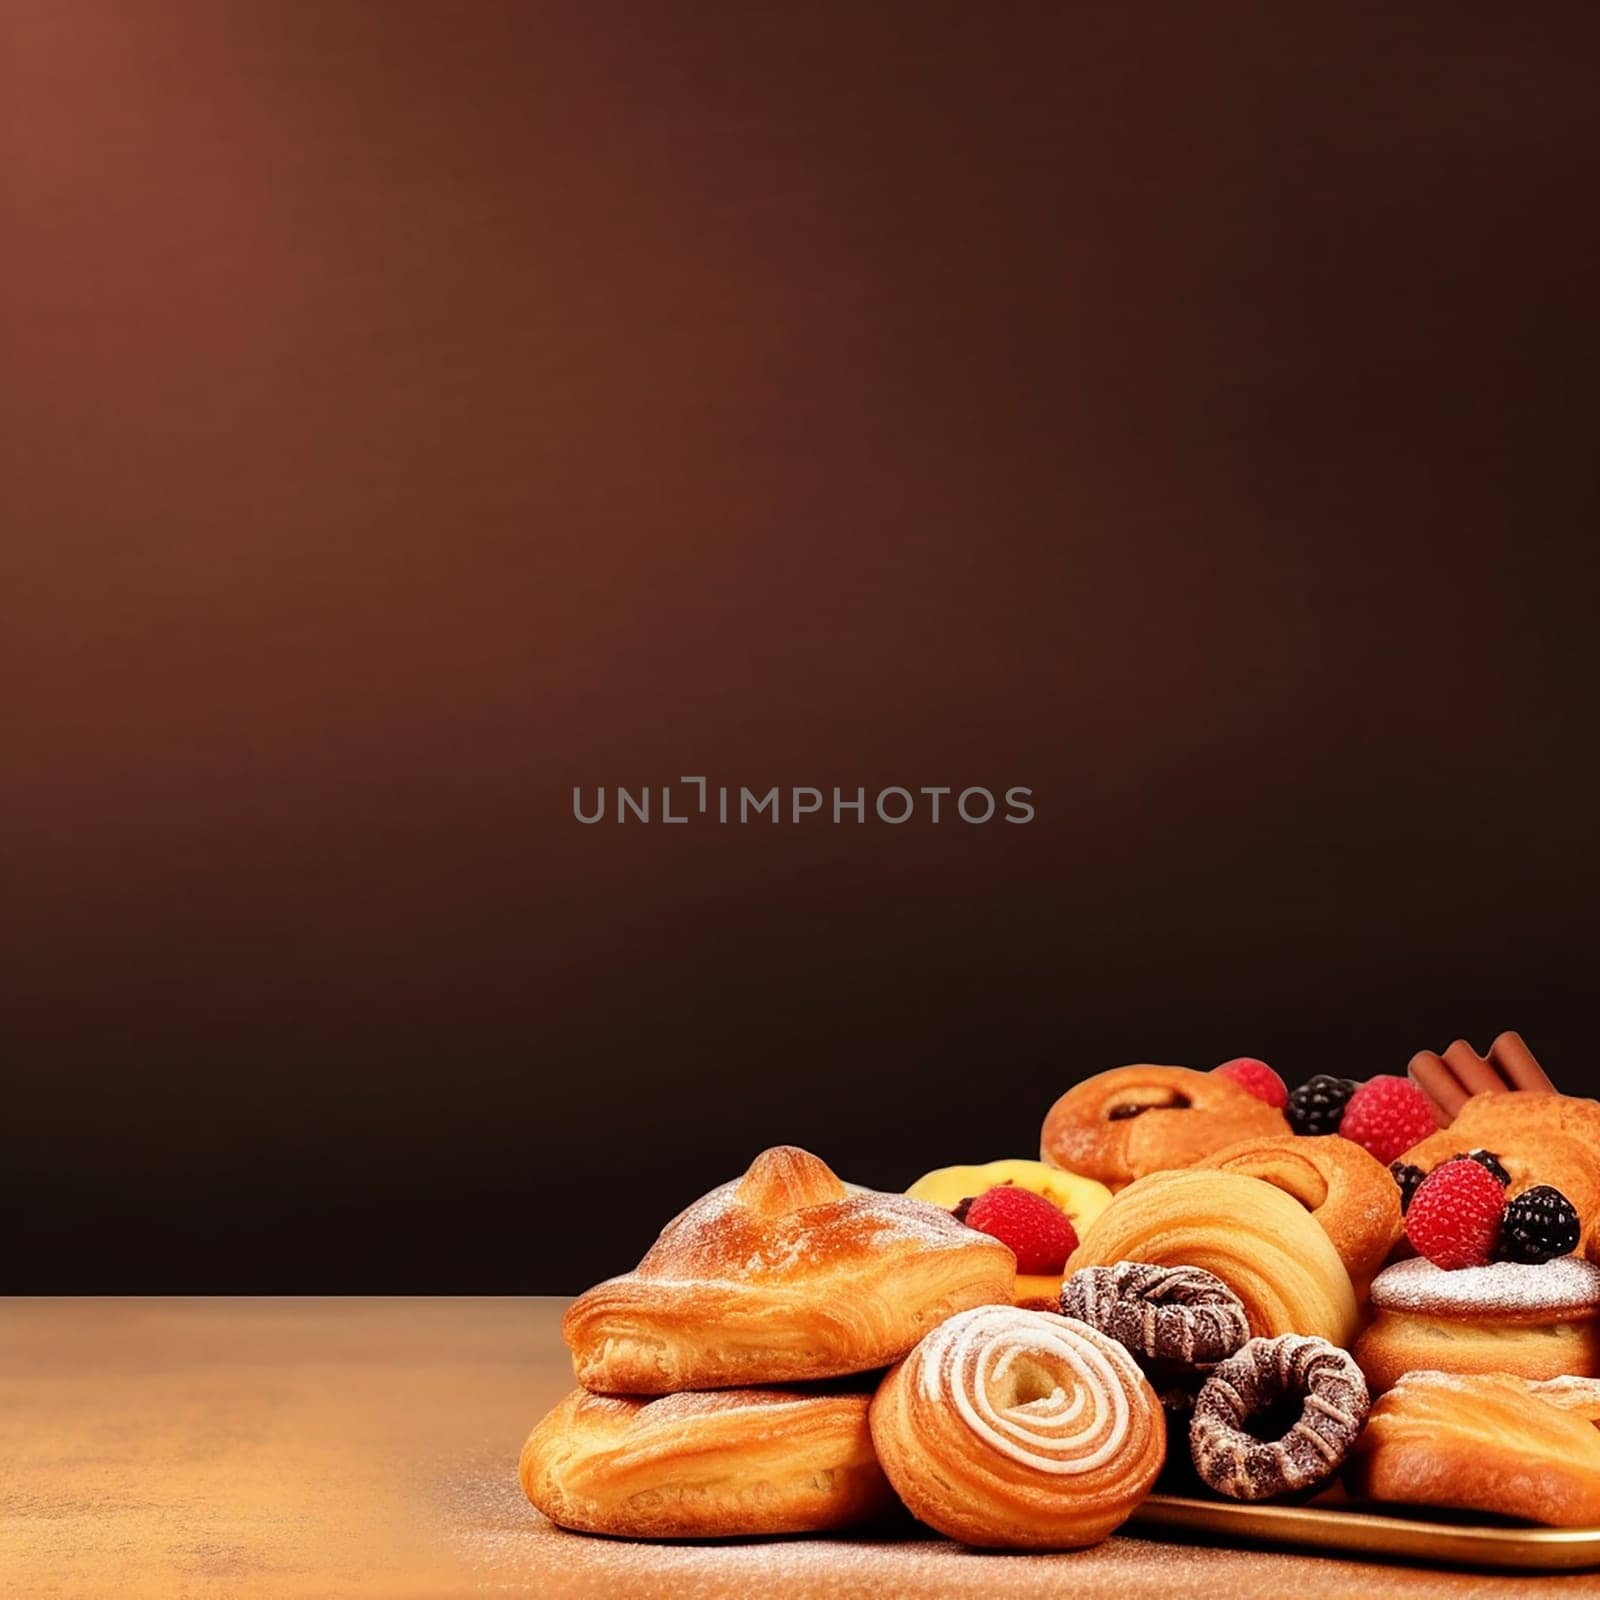 Assorted pastries with berries on a wooden surface against a dark background by Hype2art